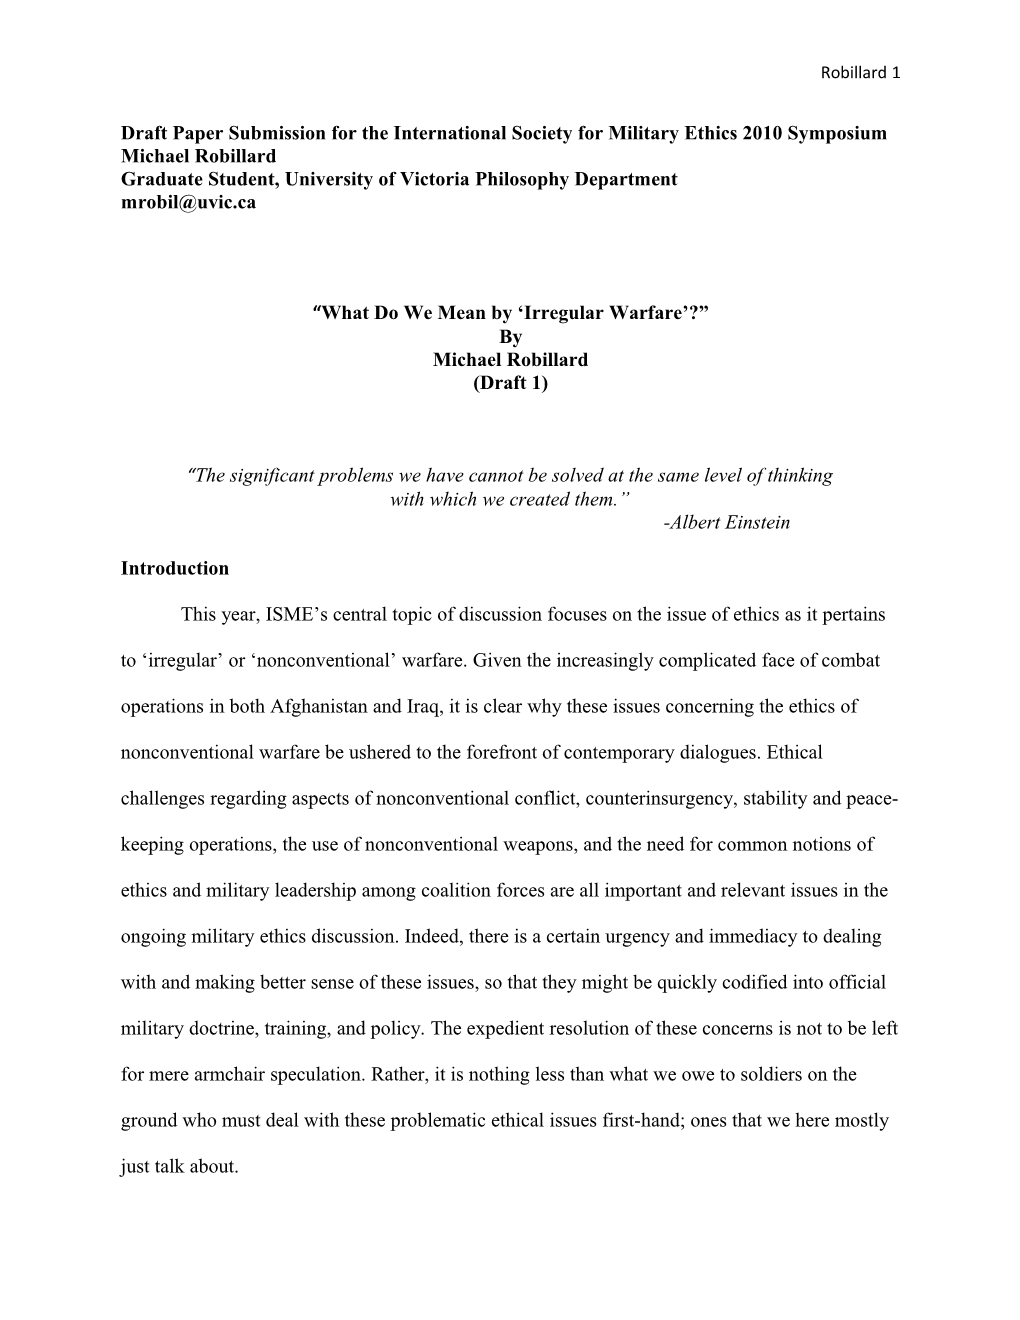 Draft Paper Submission For The International Society For Military Ethics 2010 Symposium